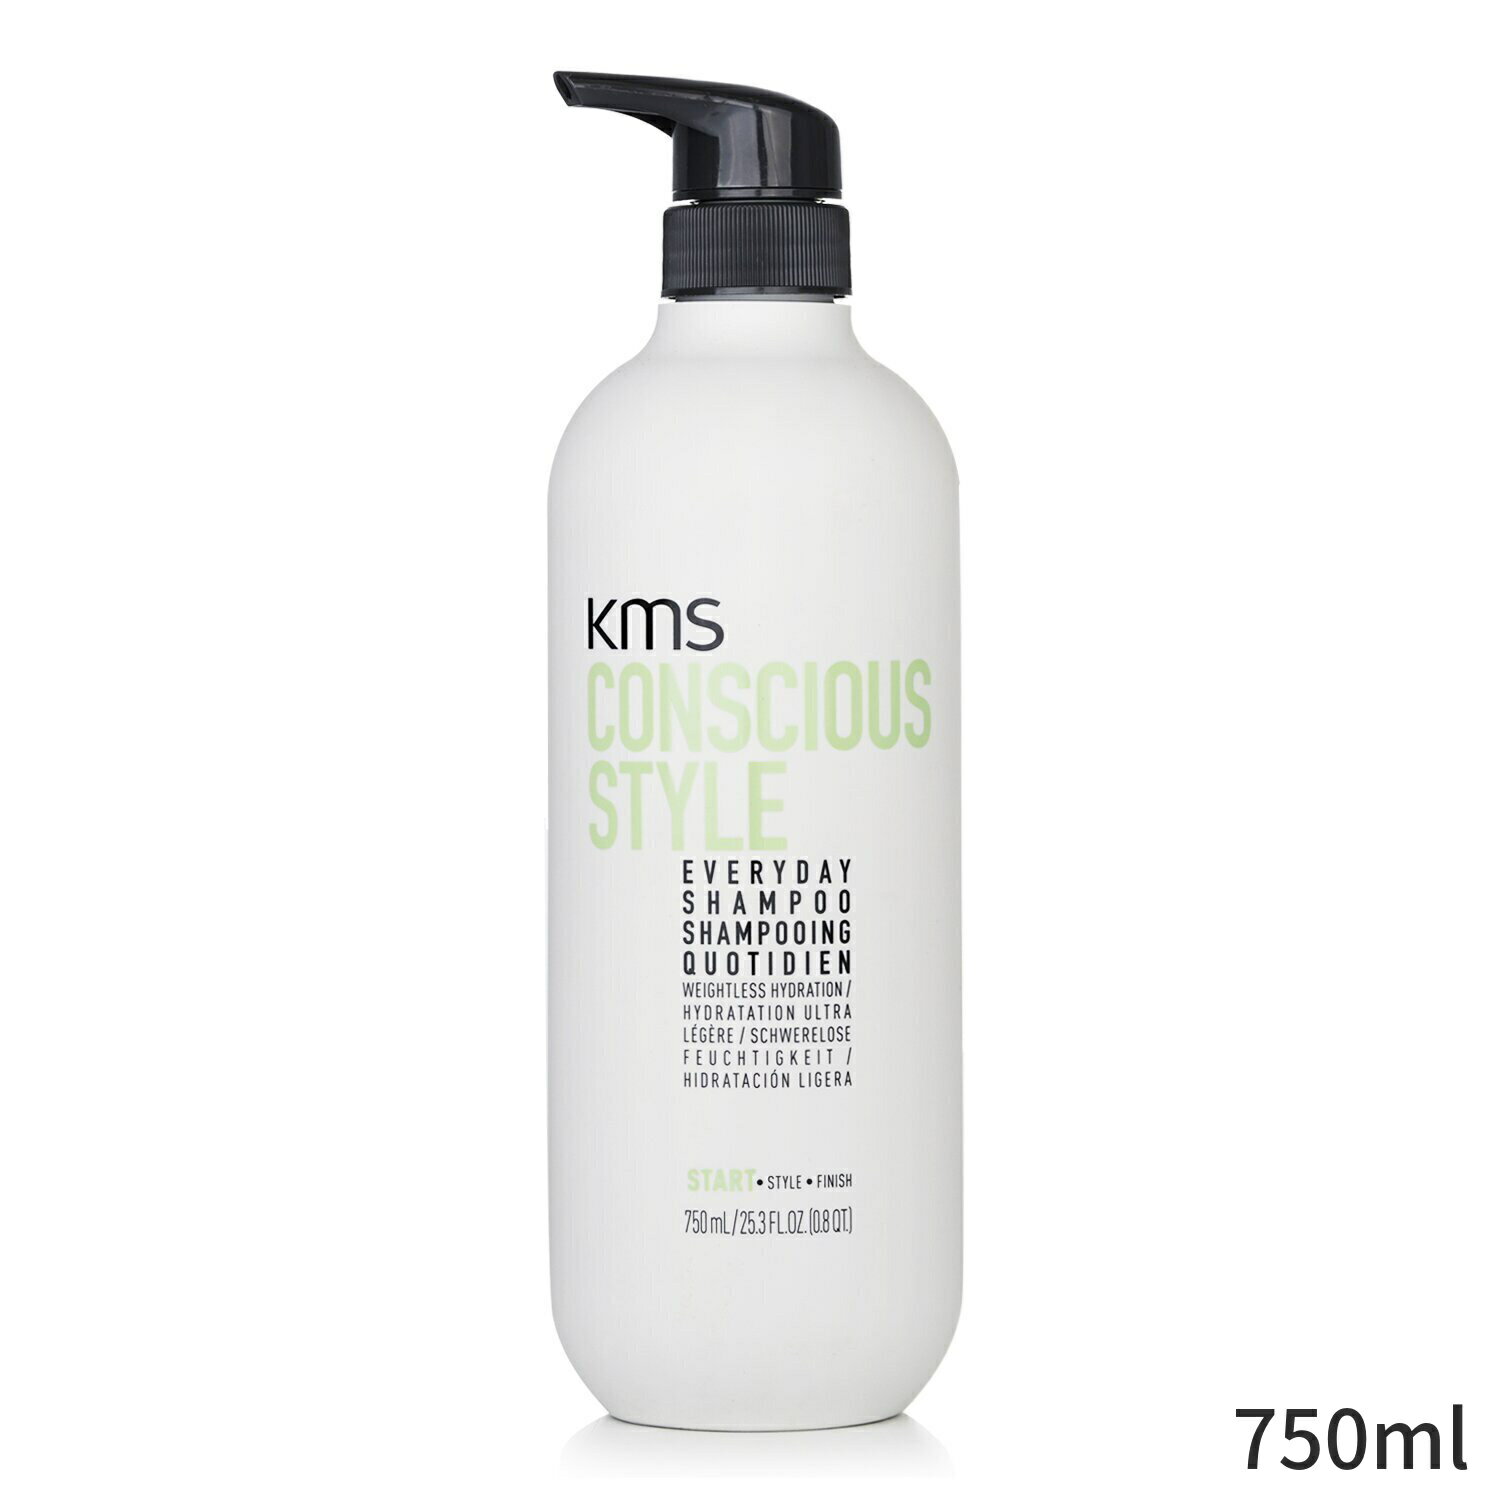 KMSカリフォルニア シャンプー KMS California Conscious Style Everyday Shampoo 750ml ヘアケア 母の日 プレゼント ギフト 2024 人気 ブランド コスメ